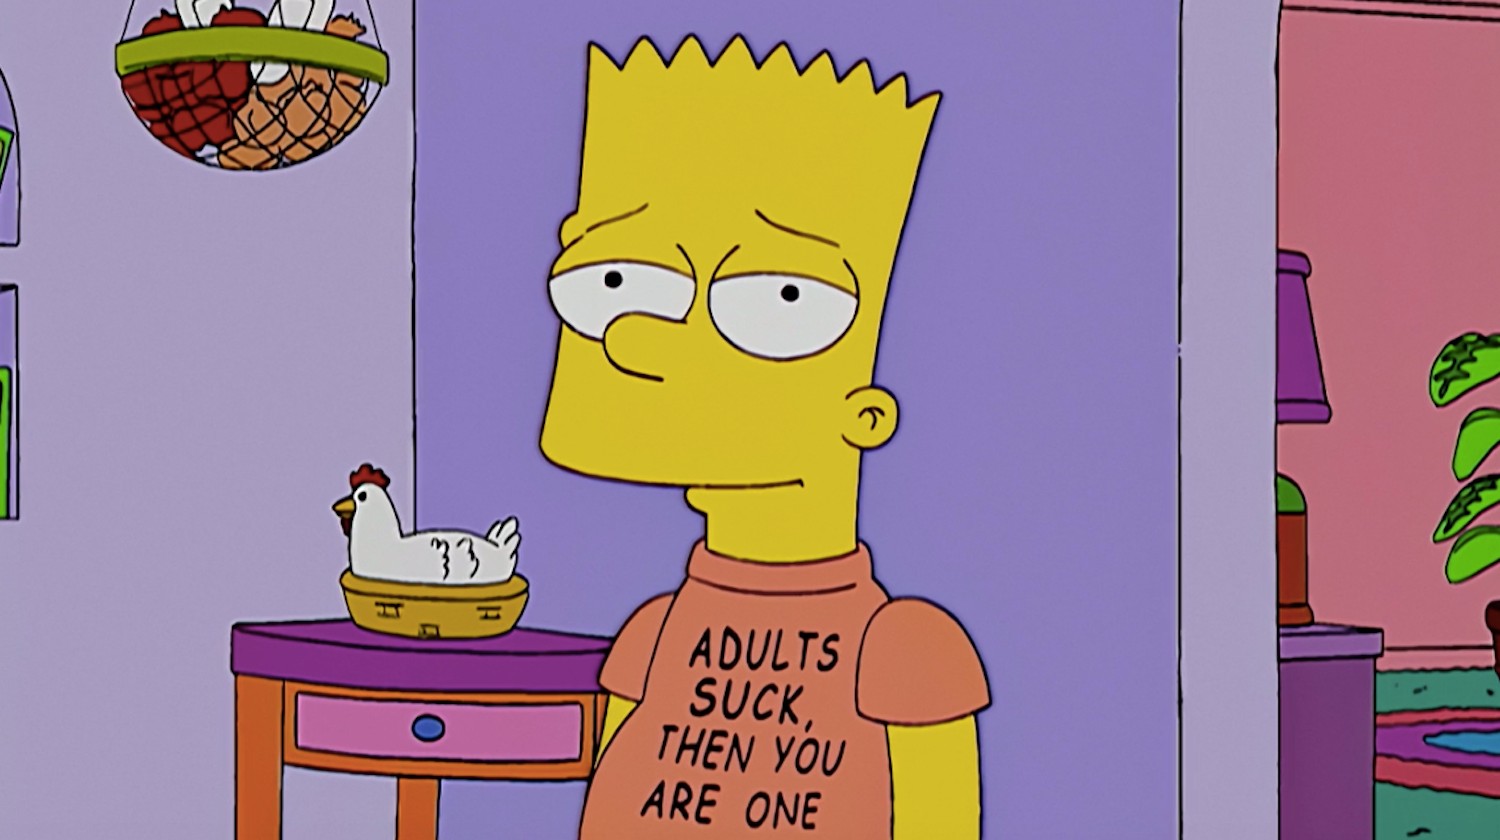 How Old Are The Simpsons Children, Really?